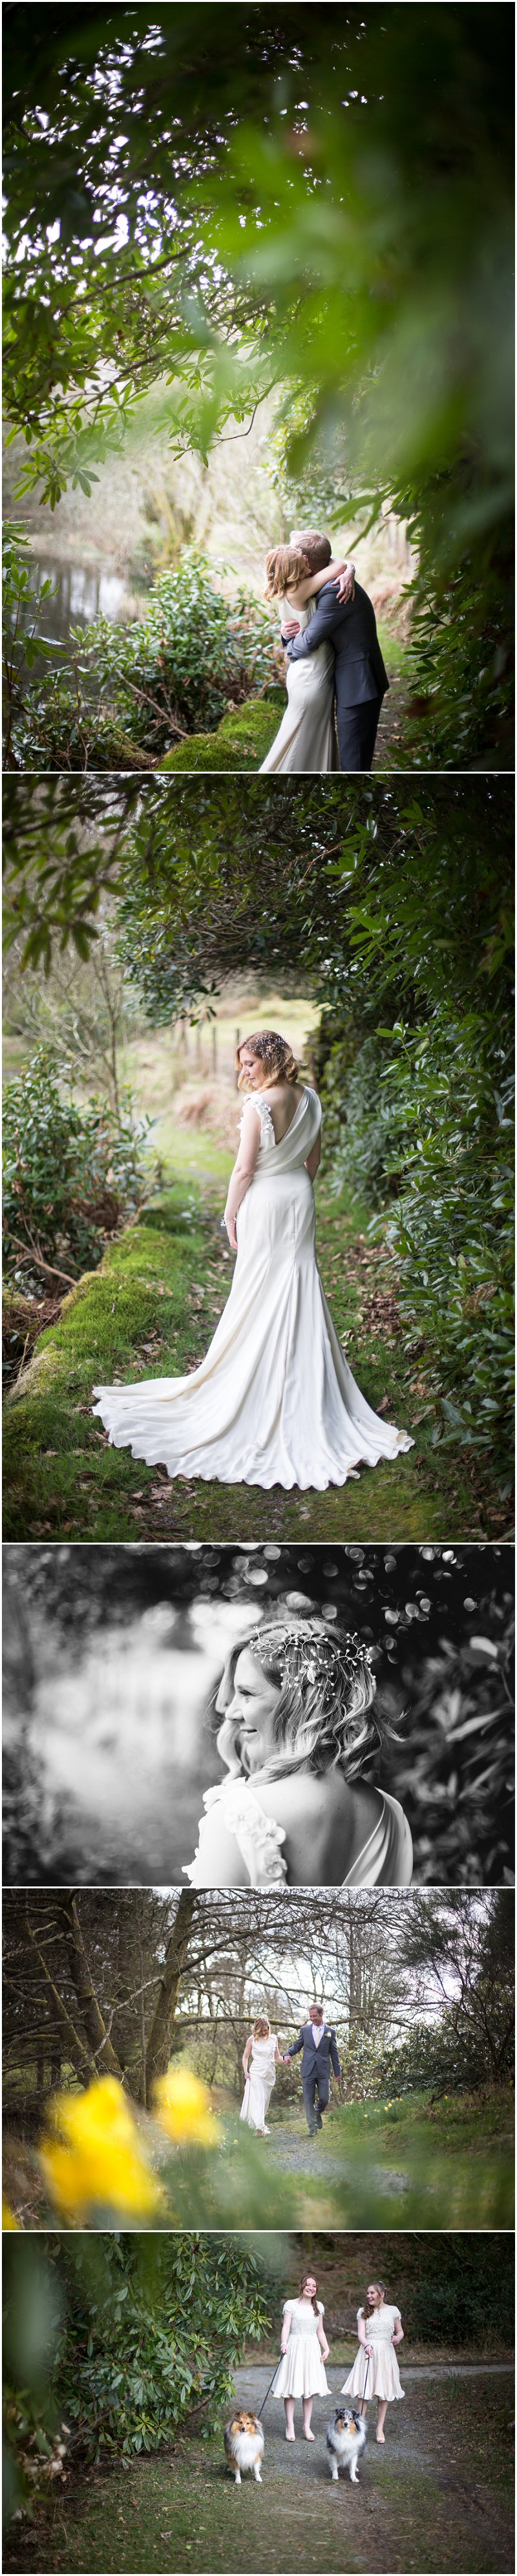 Stunning bride and groom during portraits at linthwaite house hotel, cumbria wedding